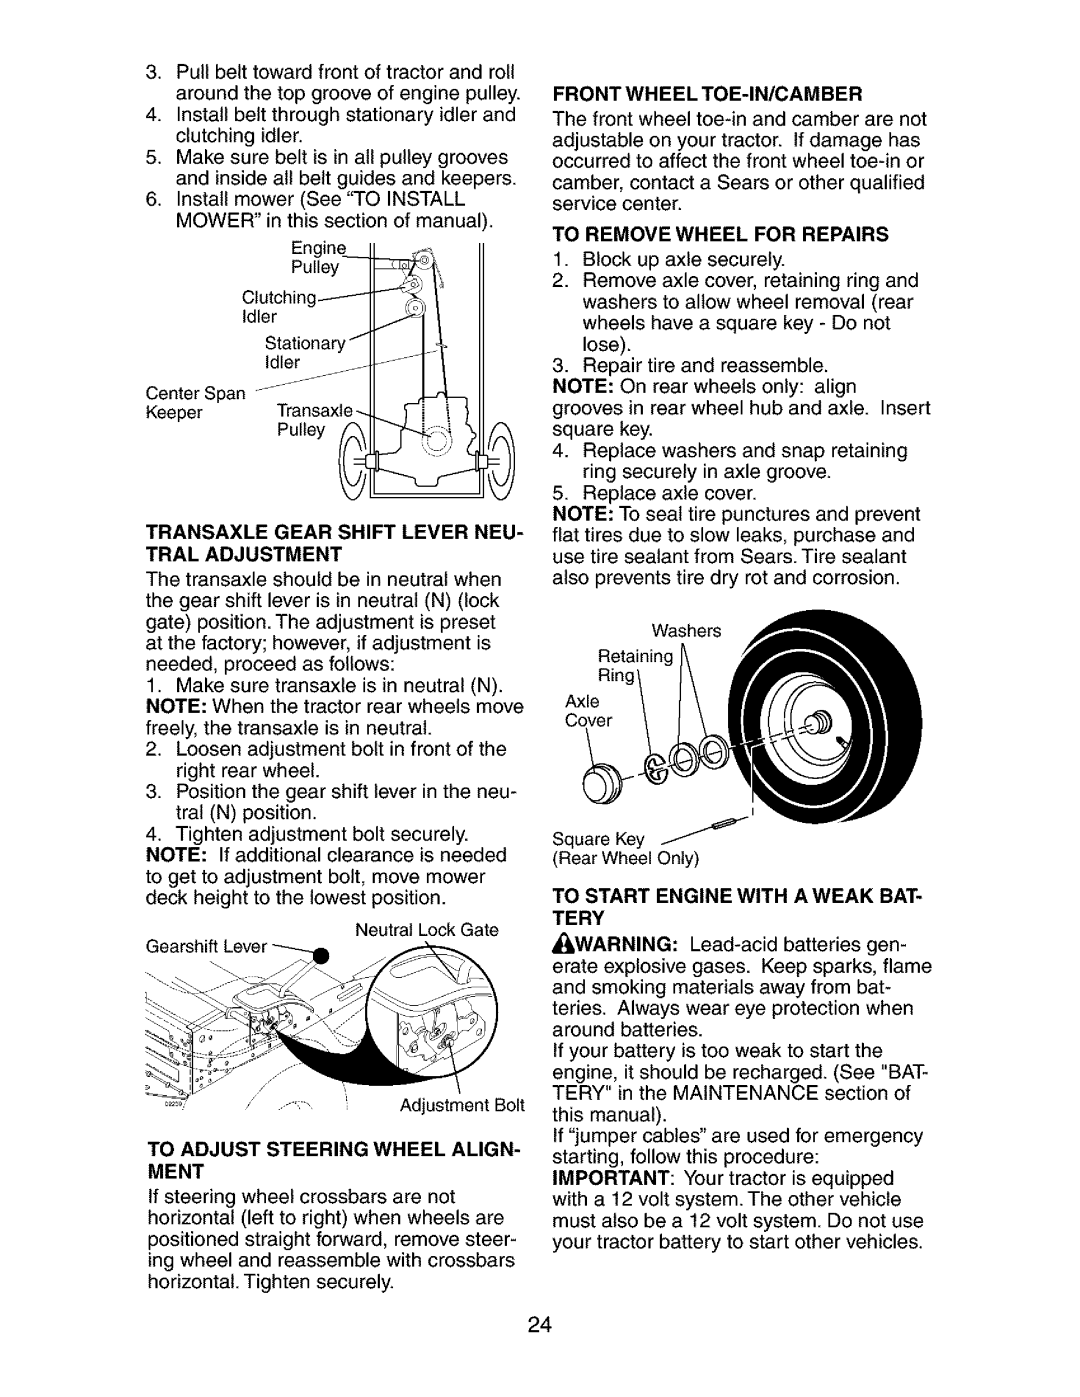 Craftsman 917.273134 owner manual To Start Engine With A Weak Bat- Tery 